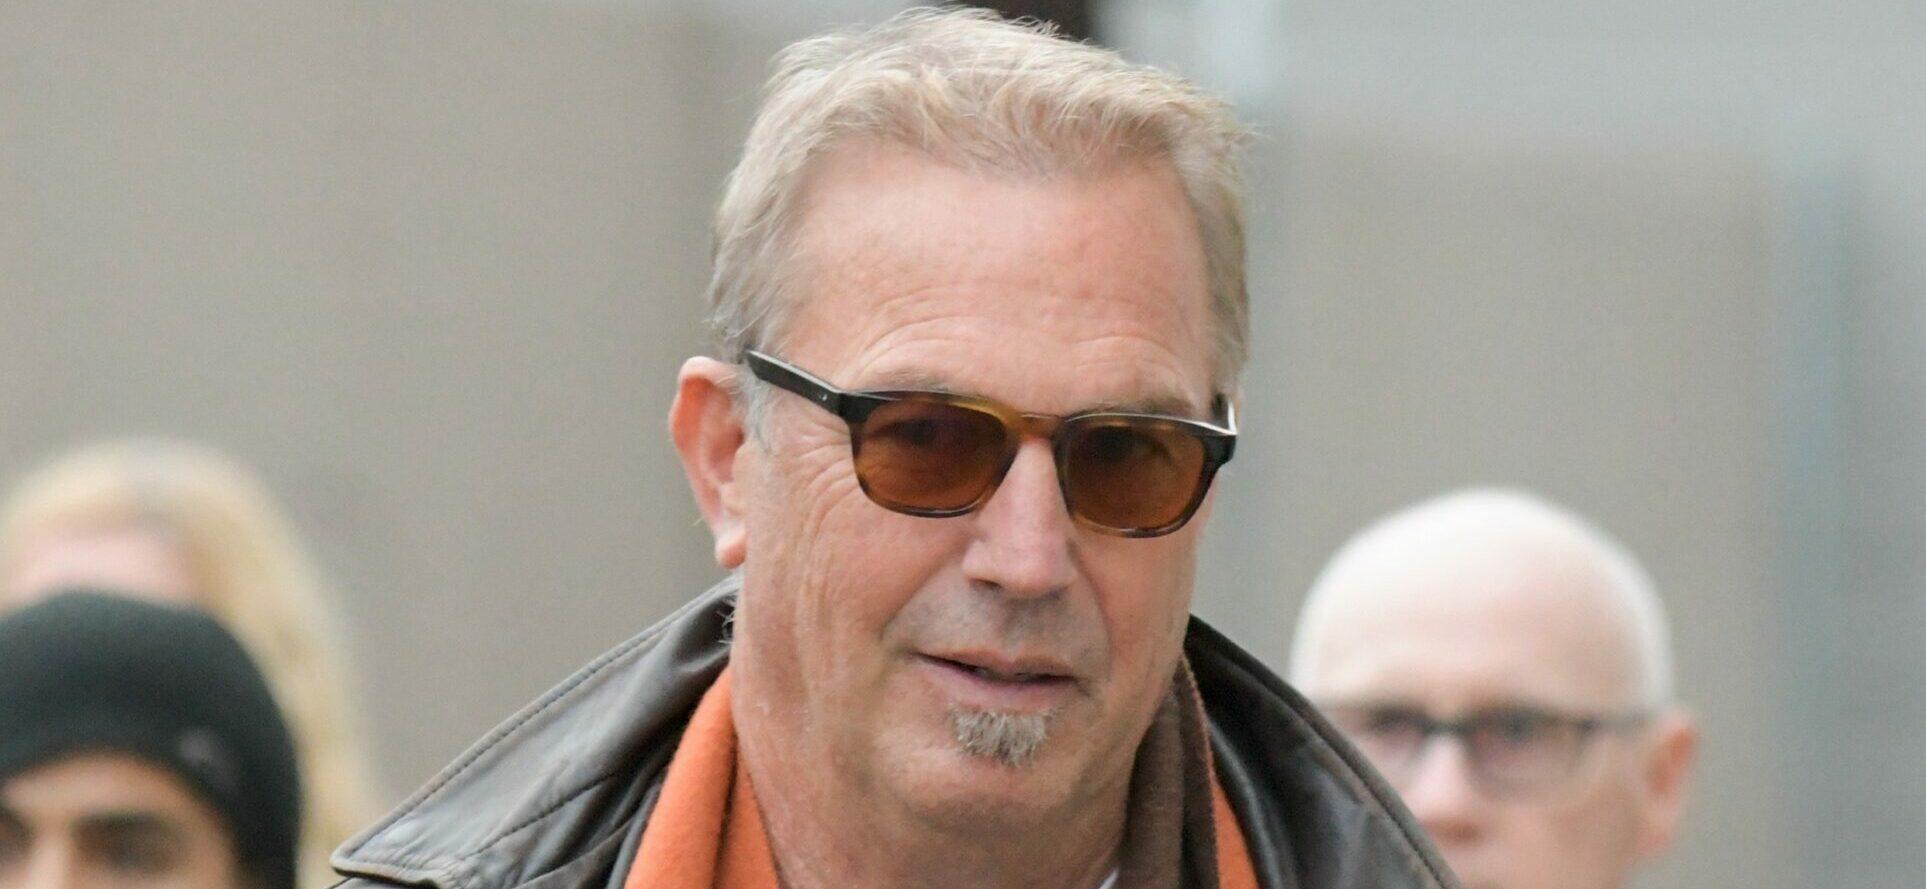 Kevin Costner Reportedly ‘Stunned’ At Wife’s Decision To File For Divorce